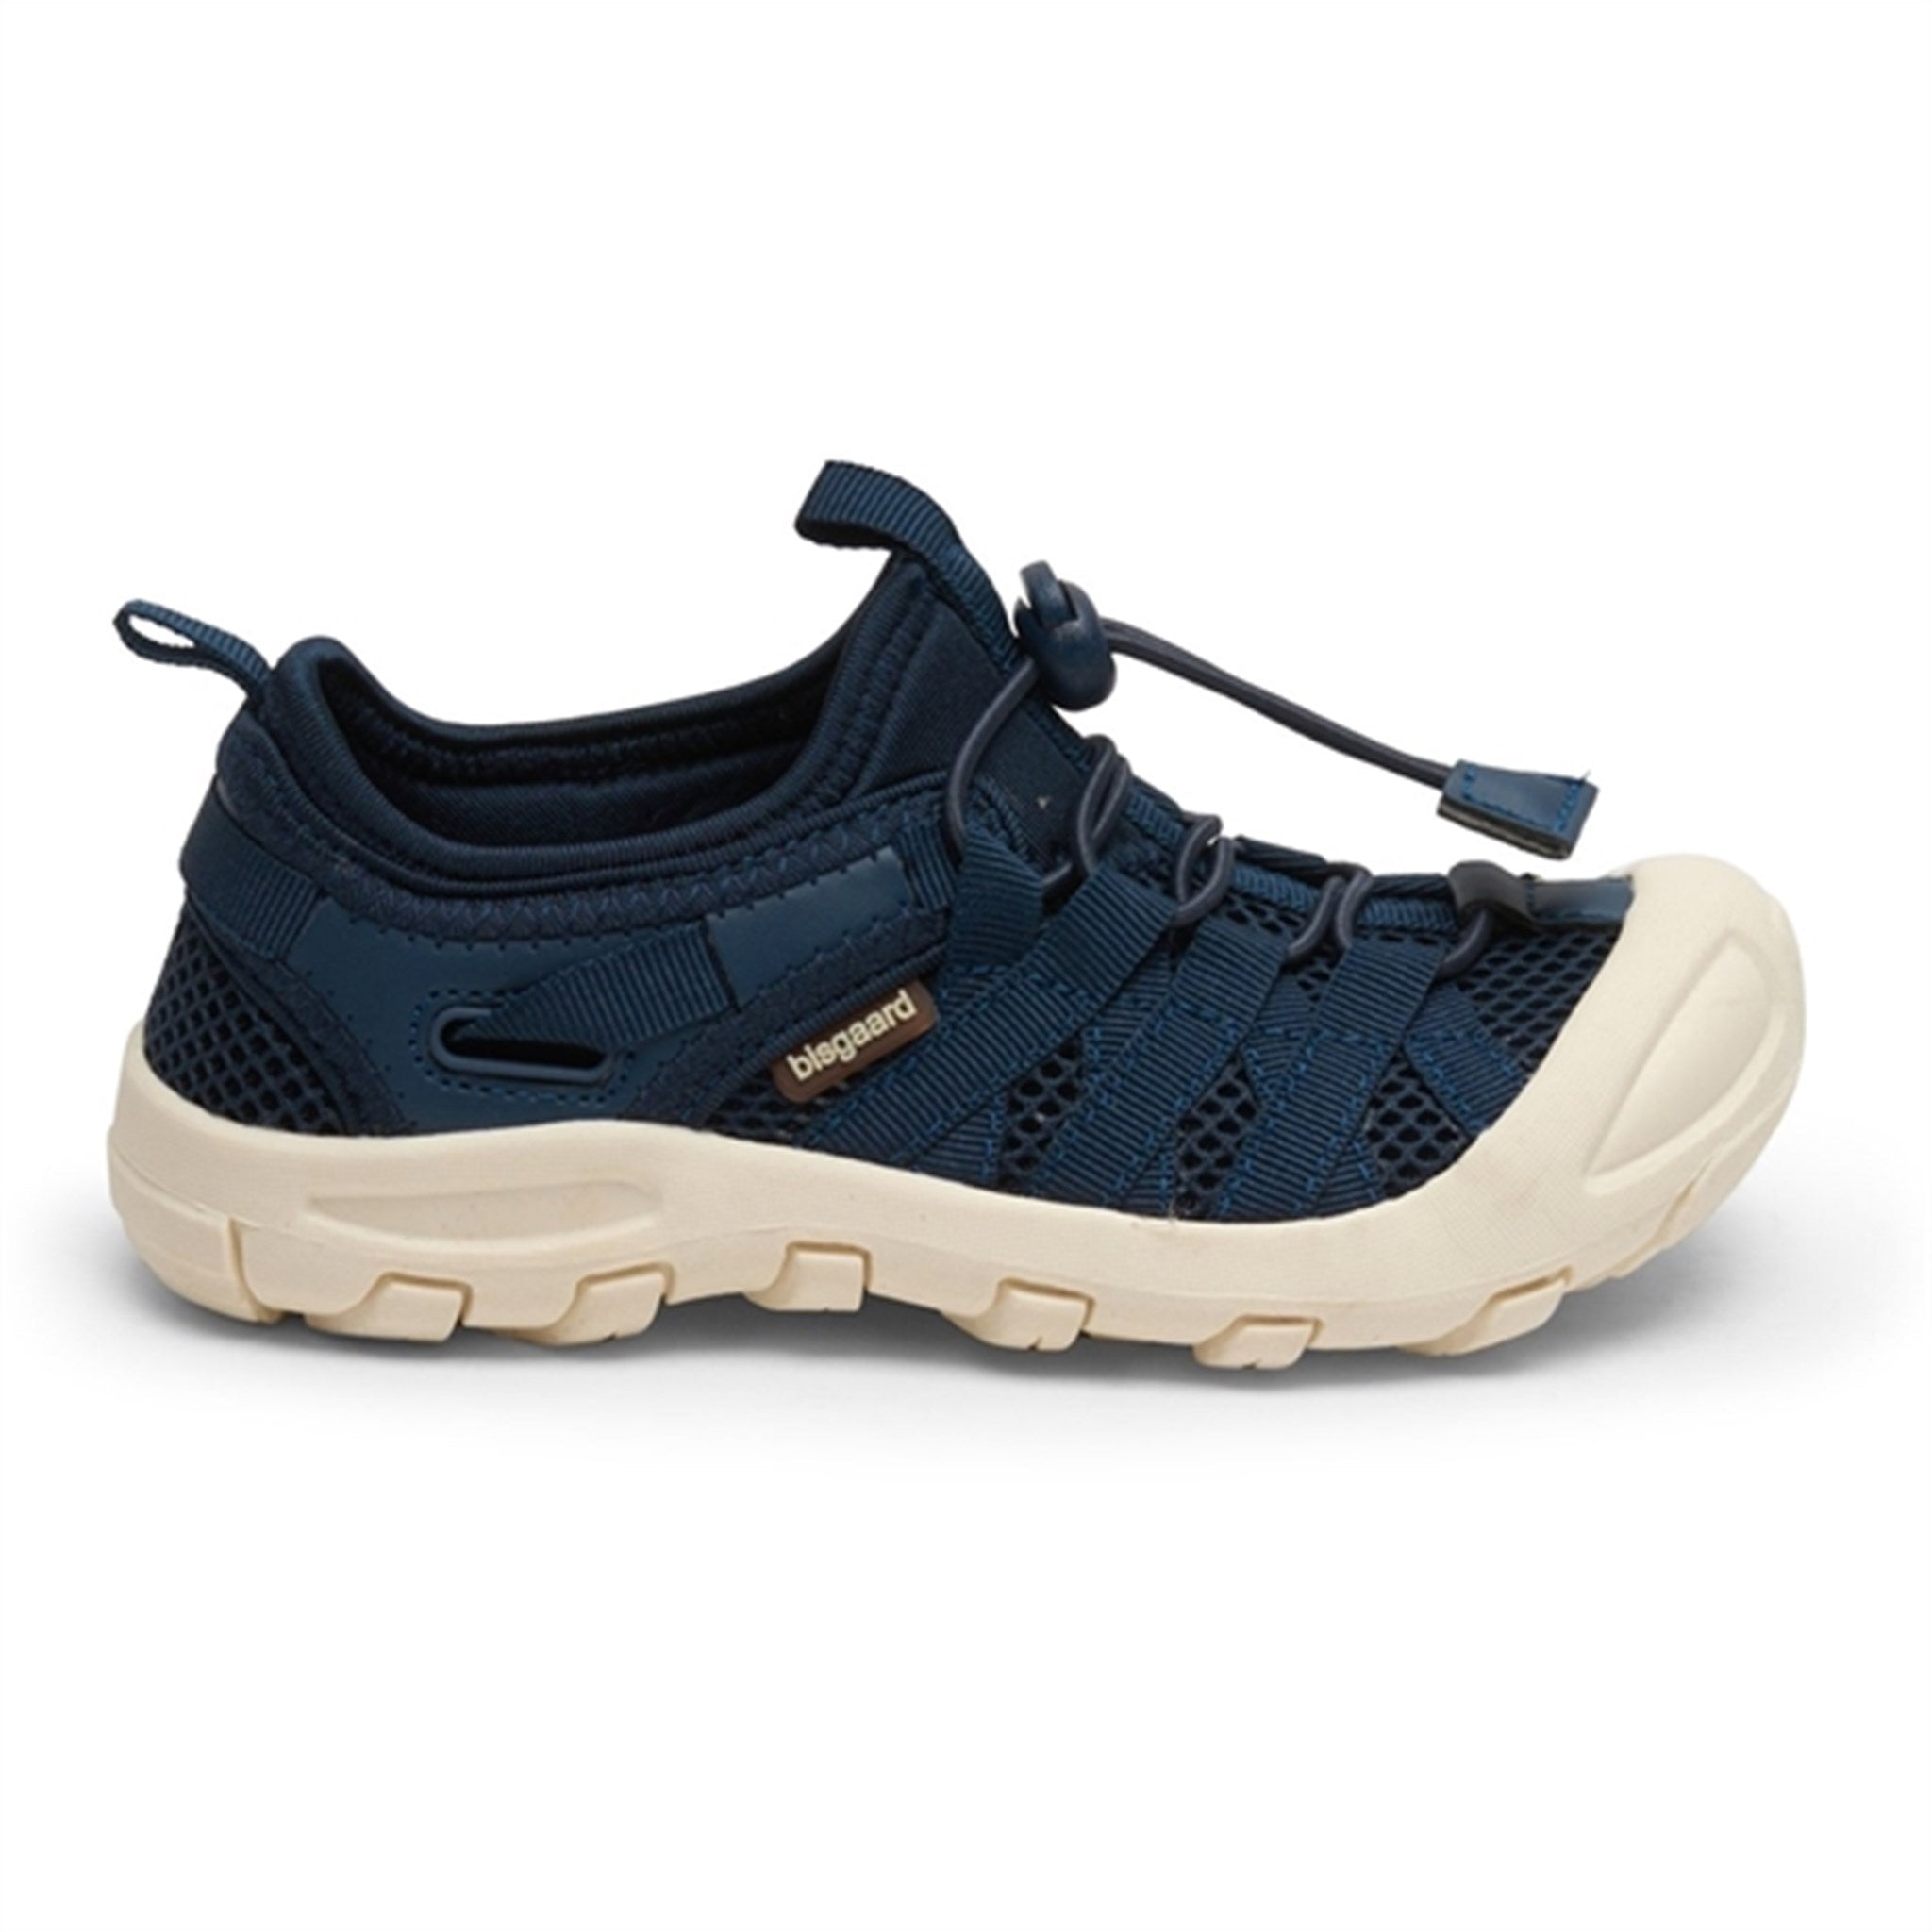 Bisgaard Zion Lace Shoes Navy